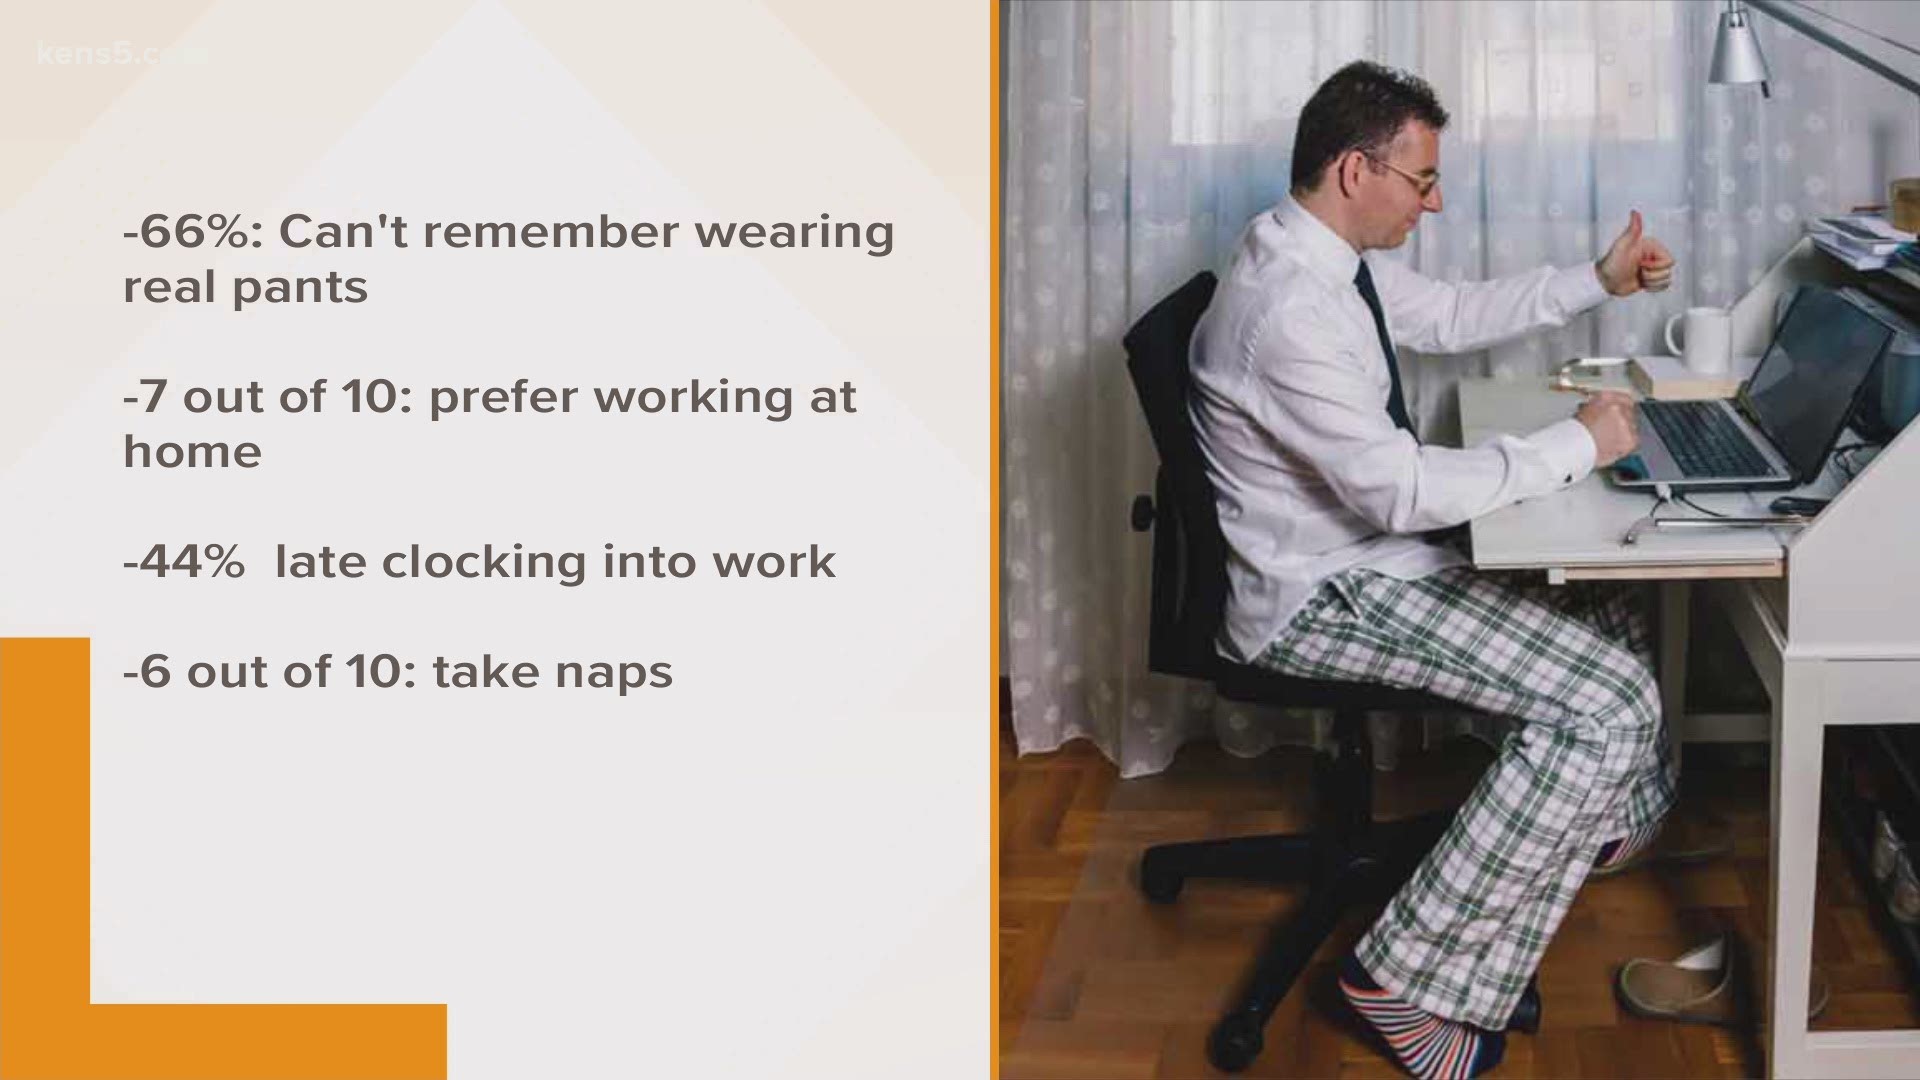 Working from home means 66% of people can't remember wearing real...pants.